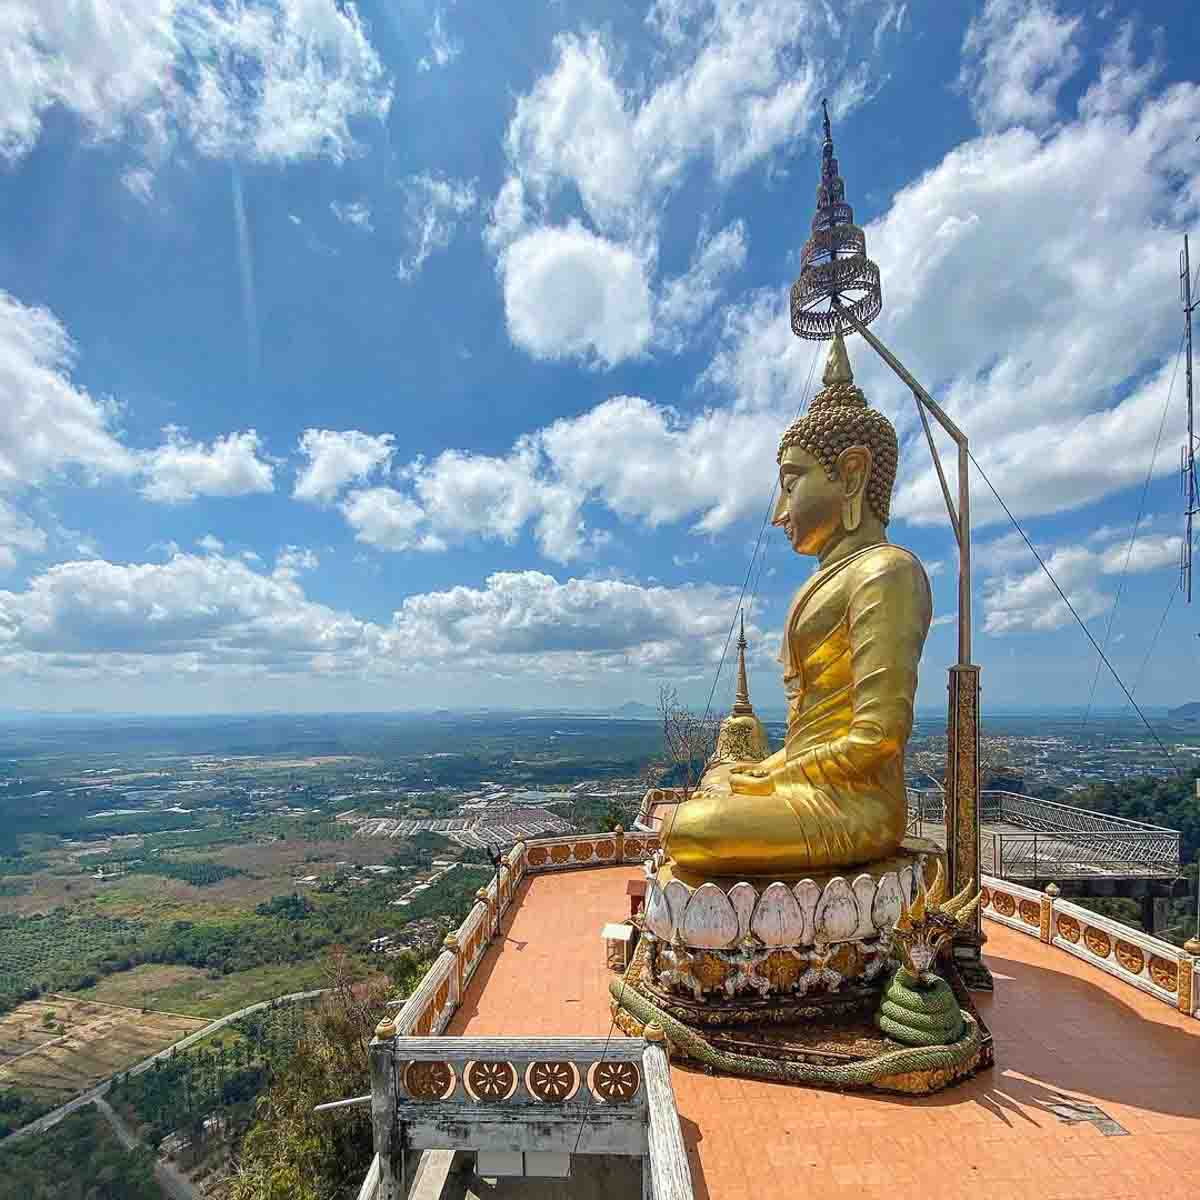 Wat Tham Suea Tiger Cave Temple in Krabi, Thailand - Flights from Singapore